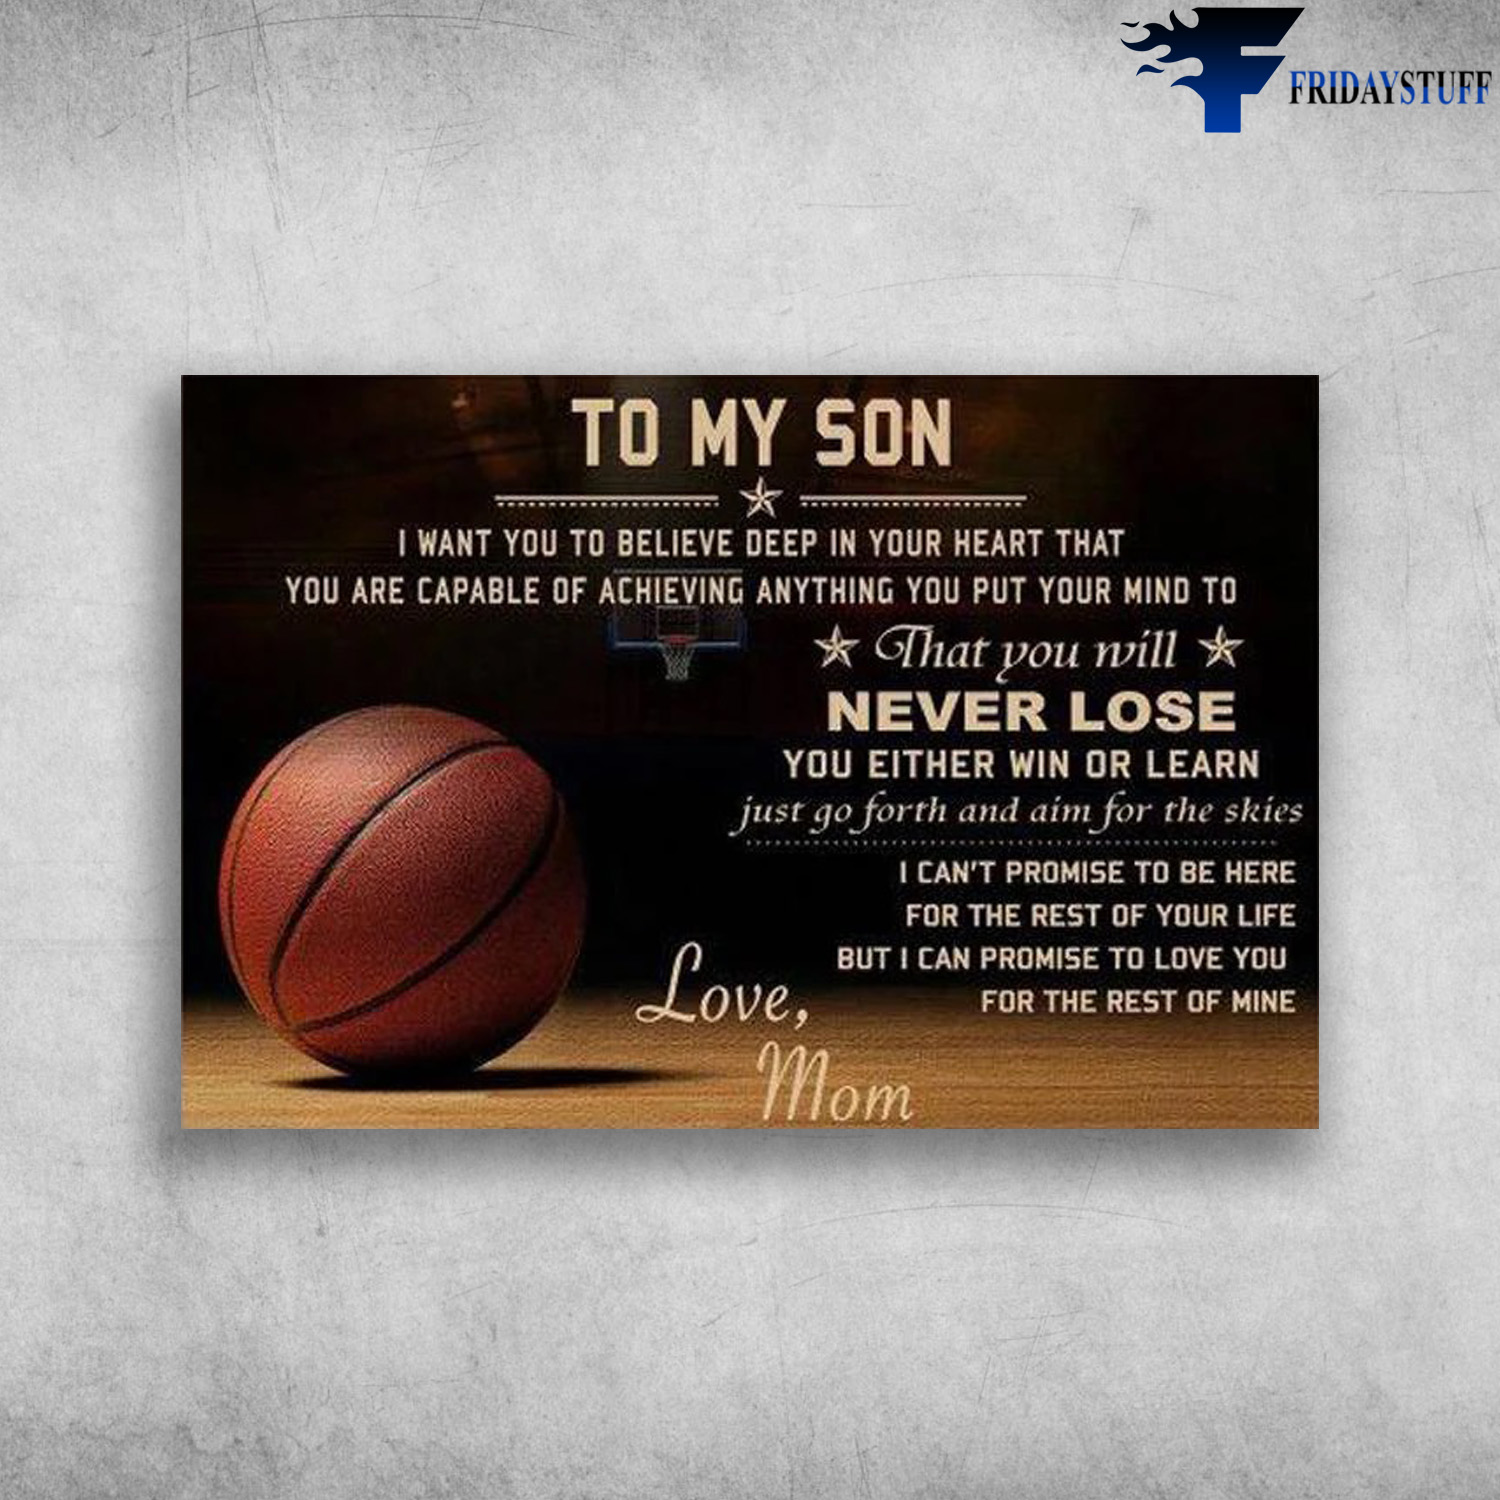 The Basketball - To My Son, I Ưant You To Believe Deep In Your Heart